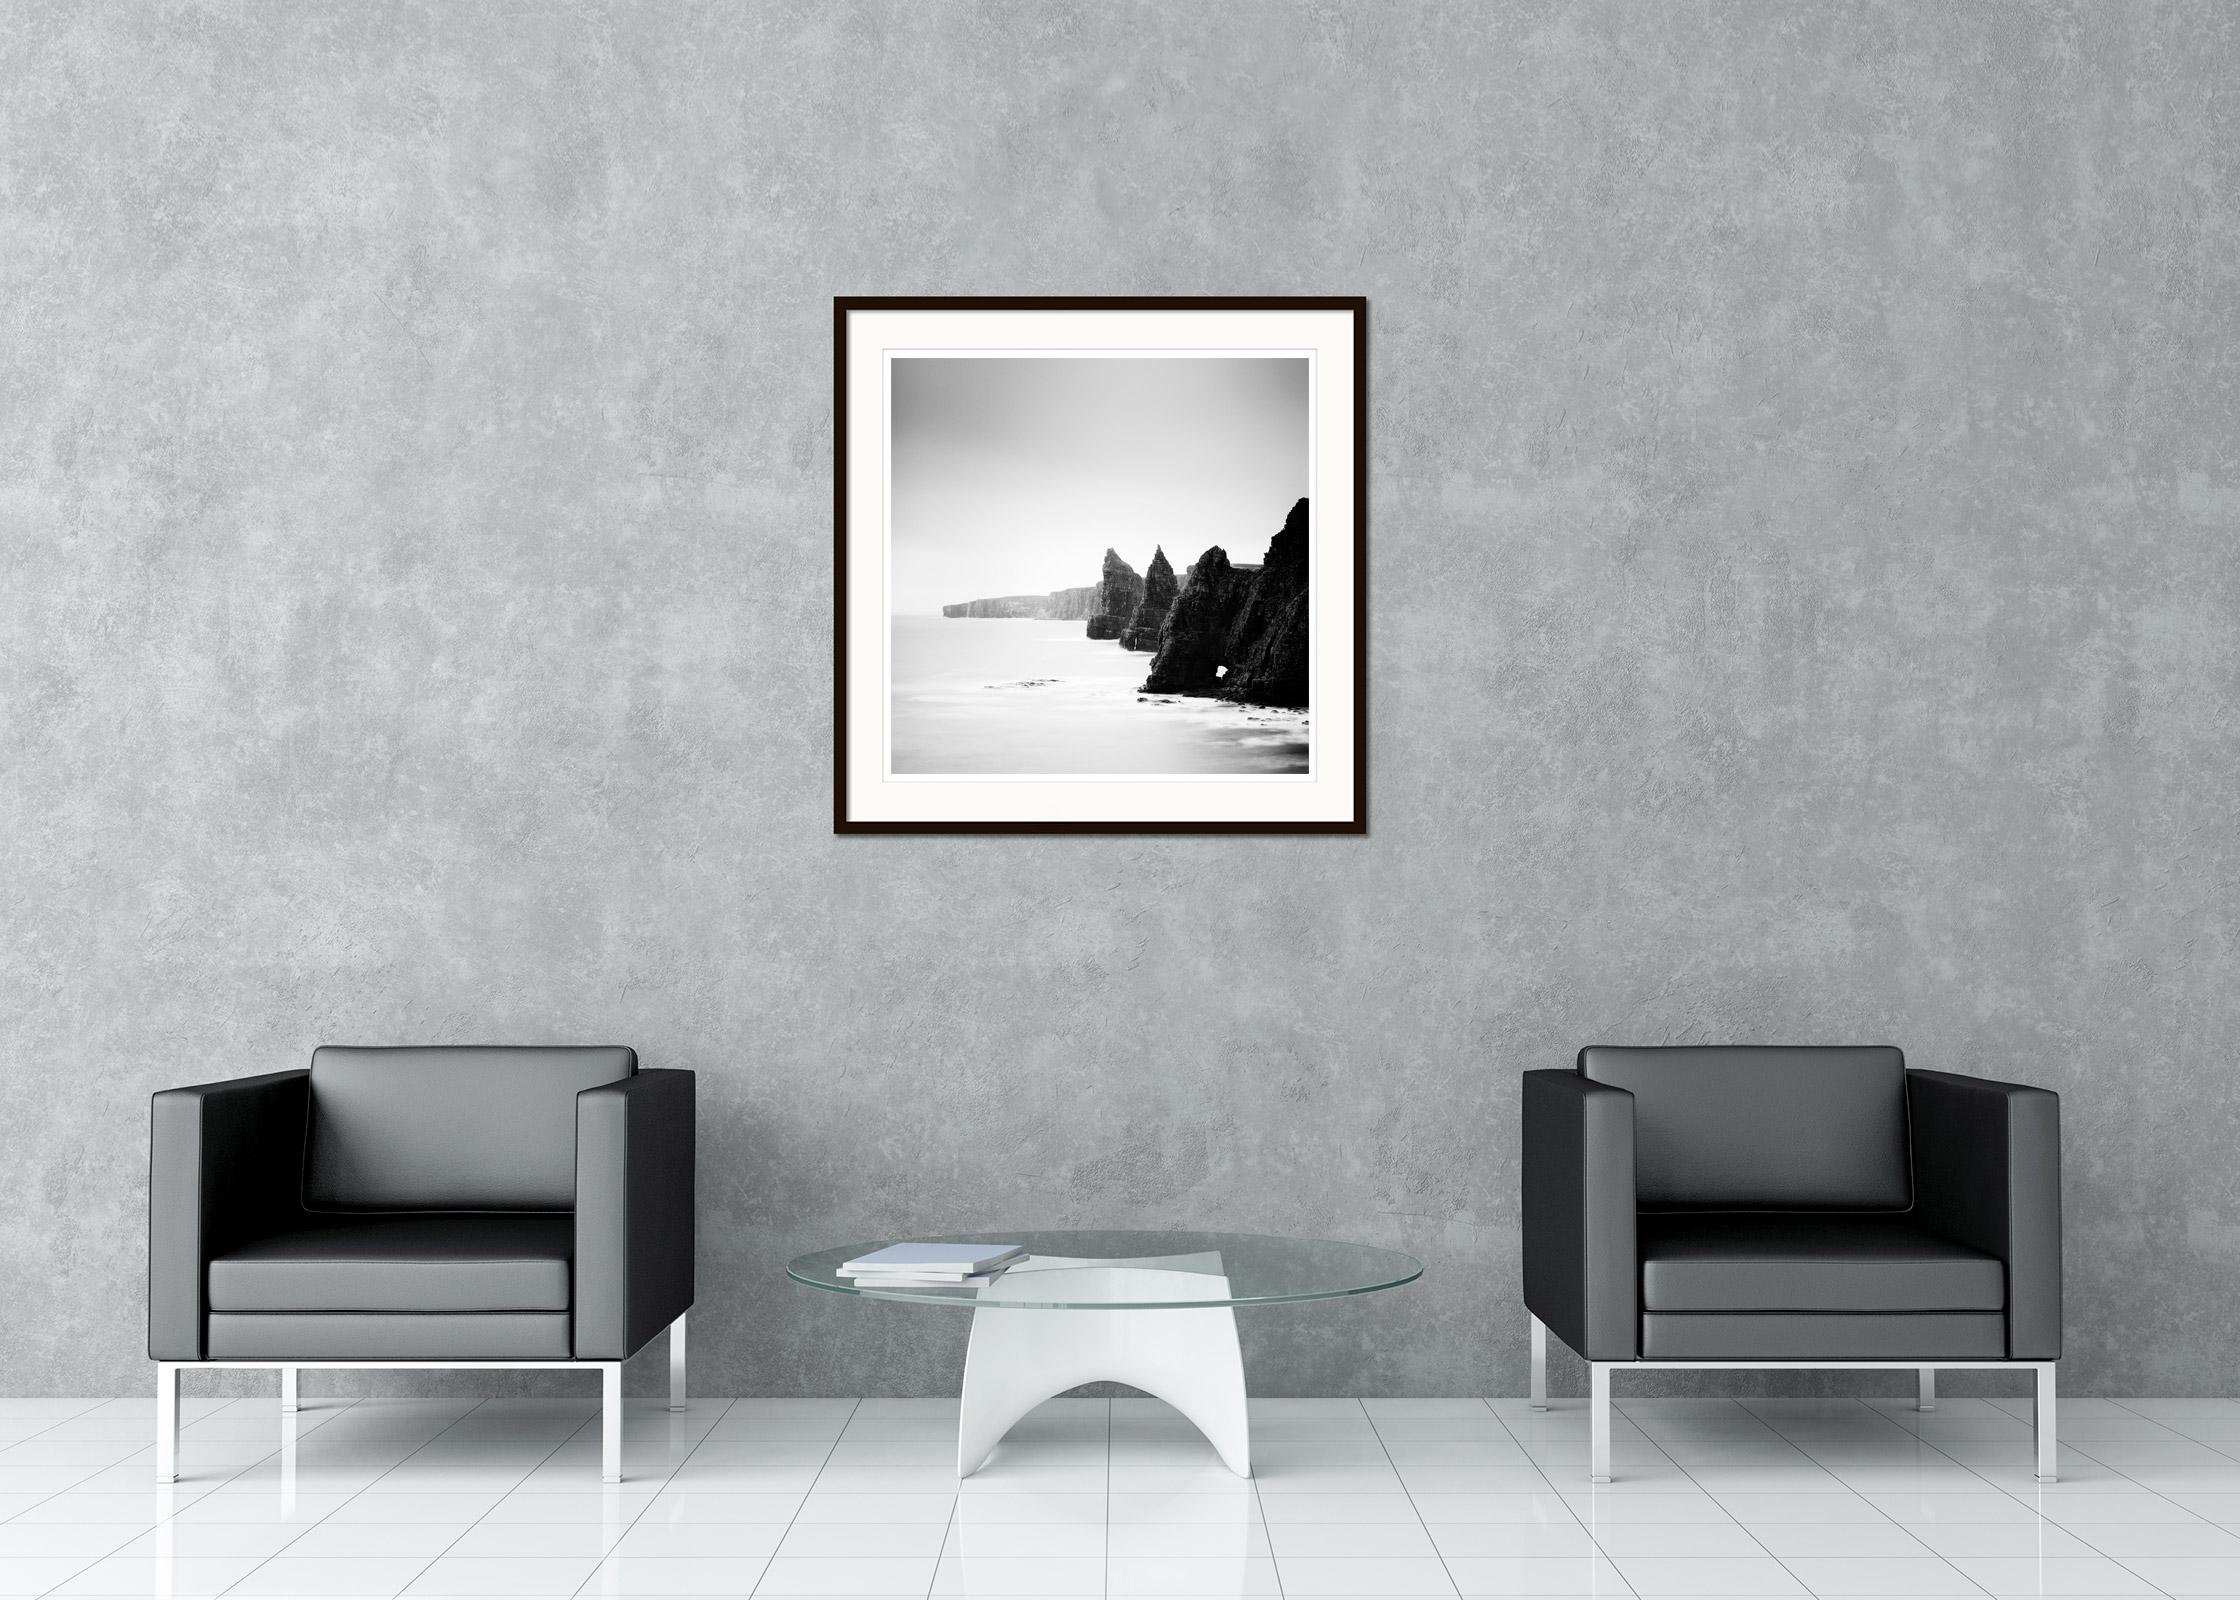 Black and White Fine Art landscape photography - Duncansby Stacks - Scotland wild coasts with the unique cliffs. Archival pigment ink print, edition of 9. Signed, titled, dated and numbered by artist. Certificate of authenticity included. Printed